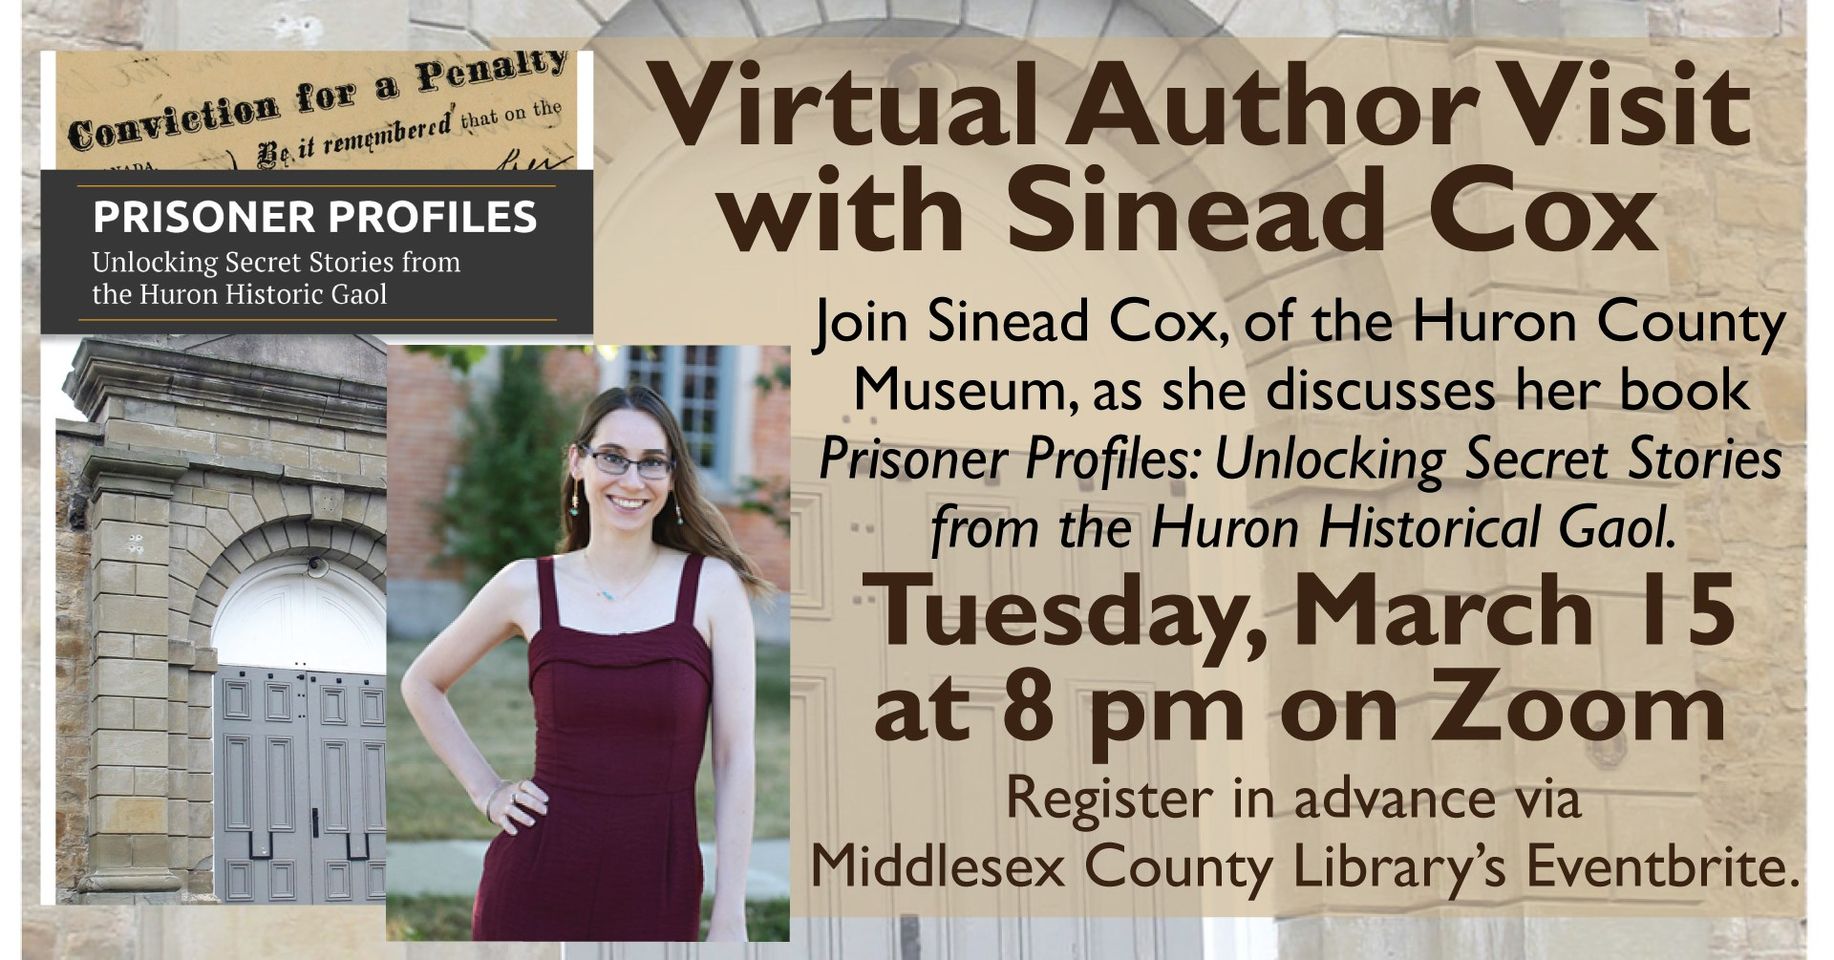 Photos of Prisoner Profiles book and Sinead Cox with text promoting author talk